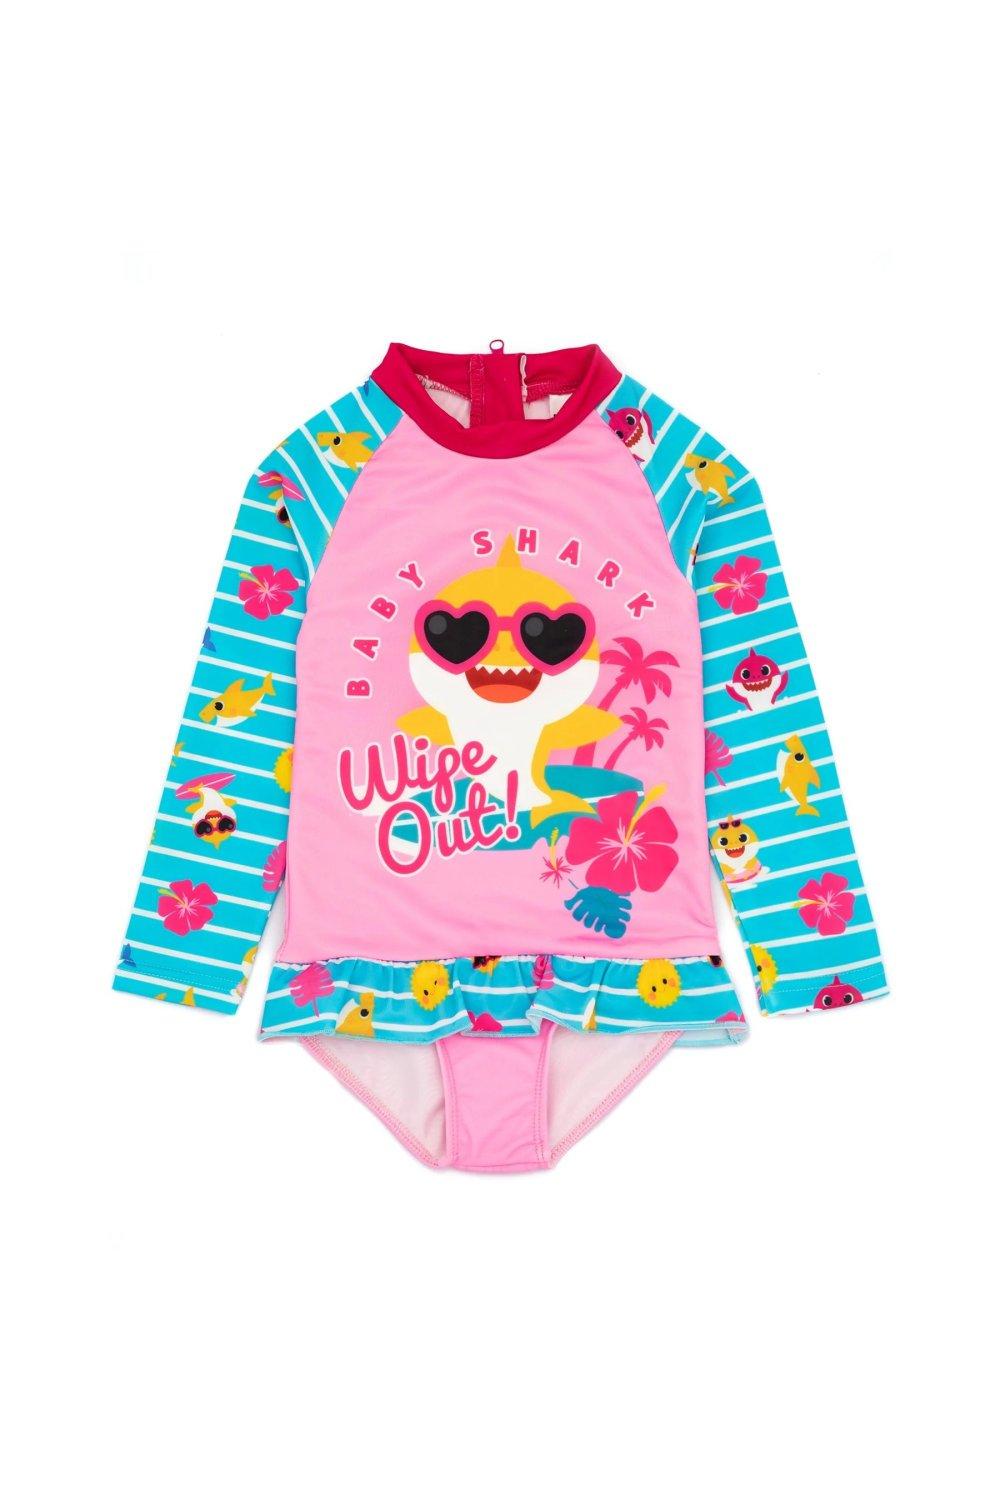 Wipe Out! Long-Sleeved One Piece Swimsuit